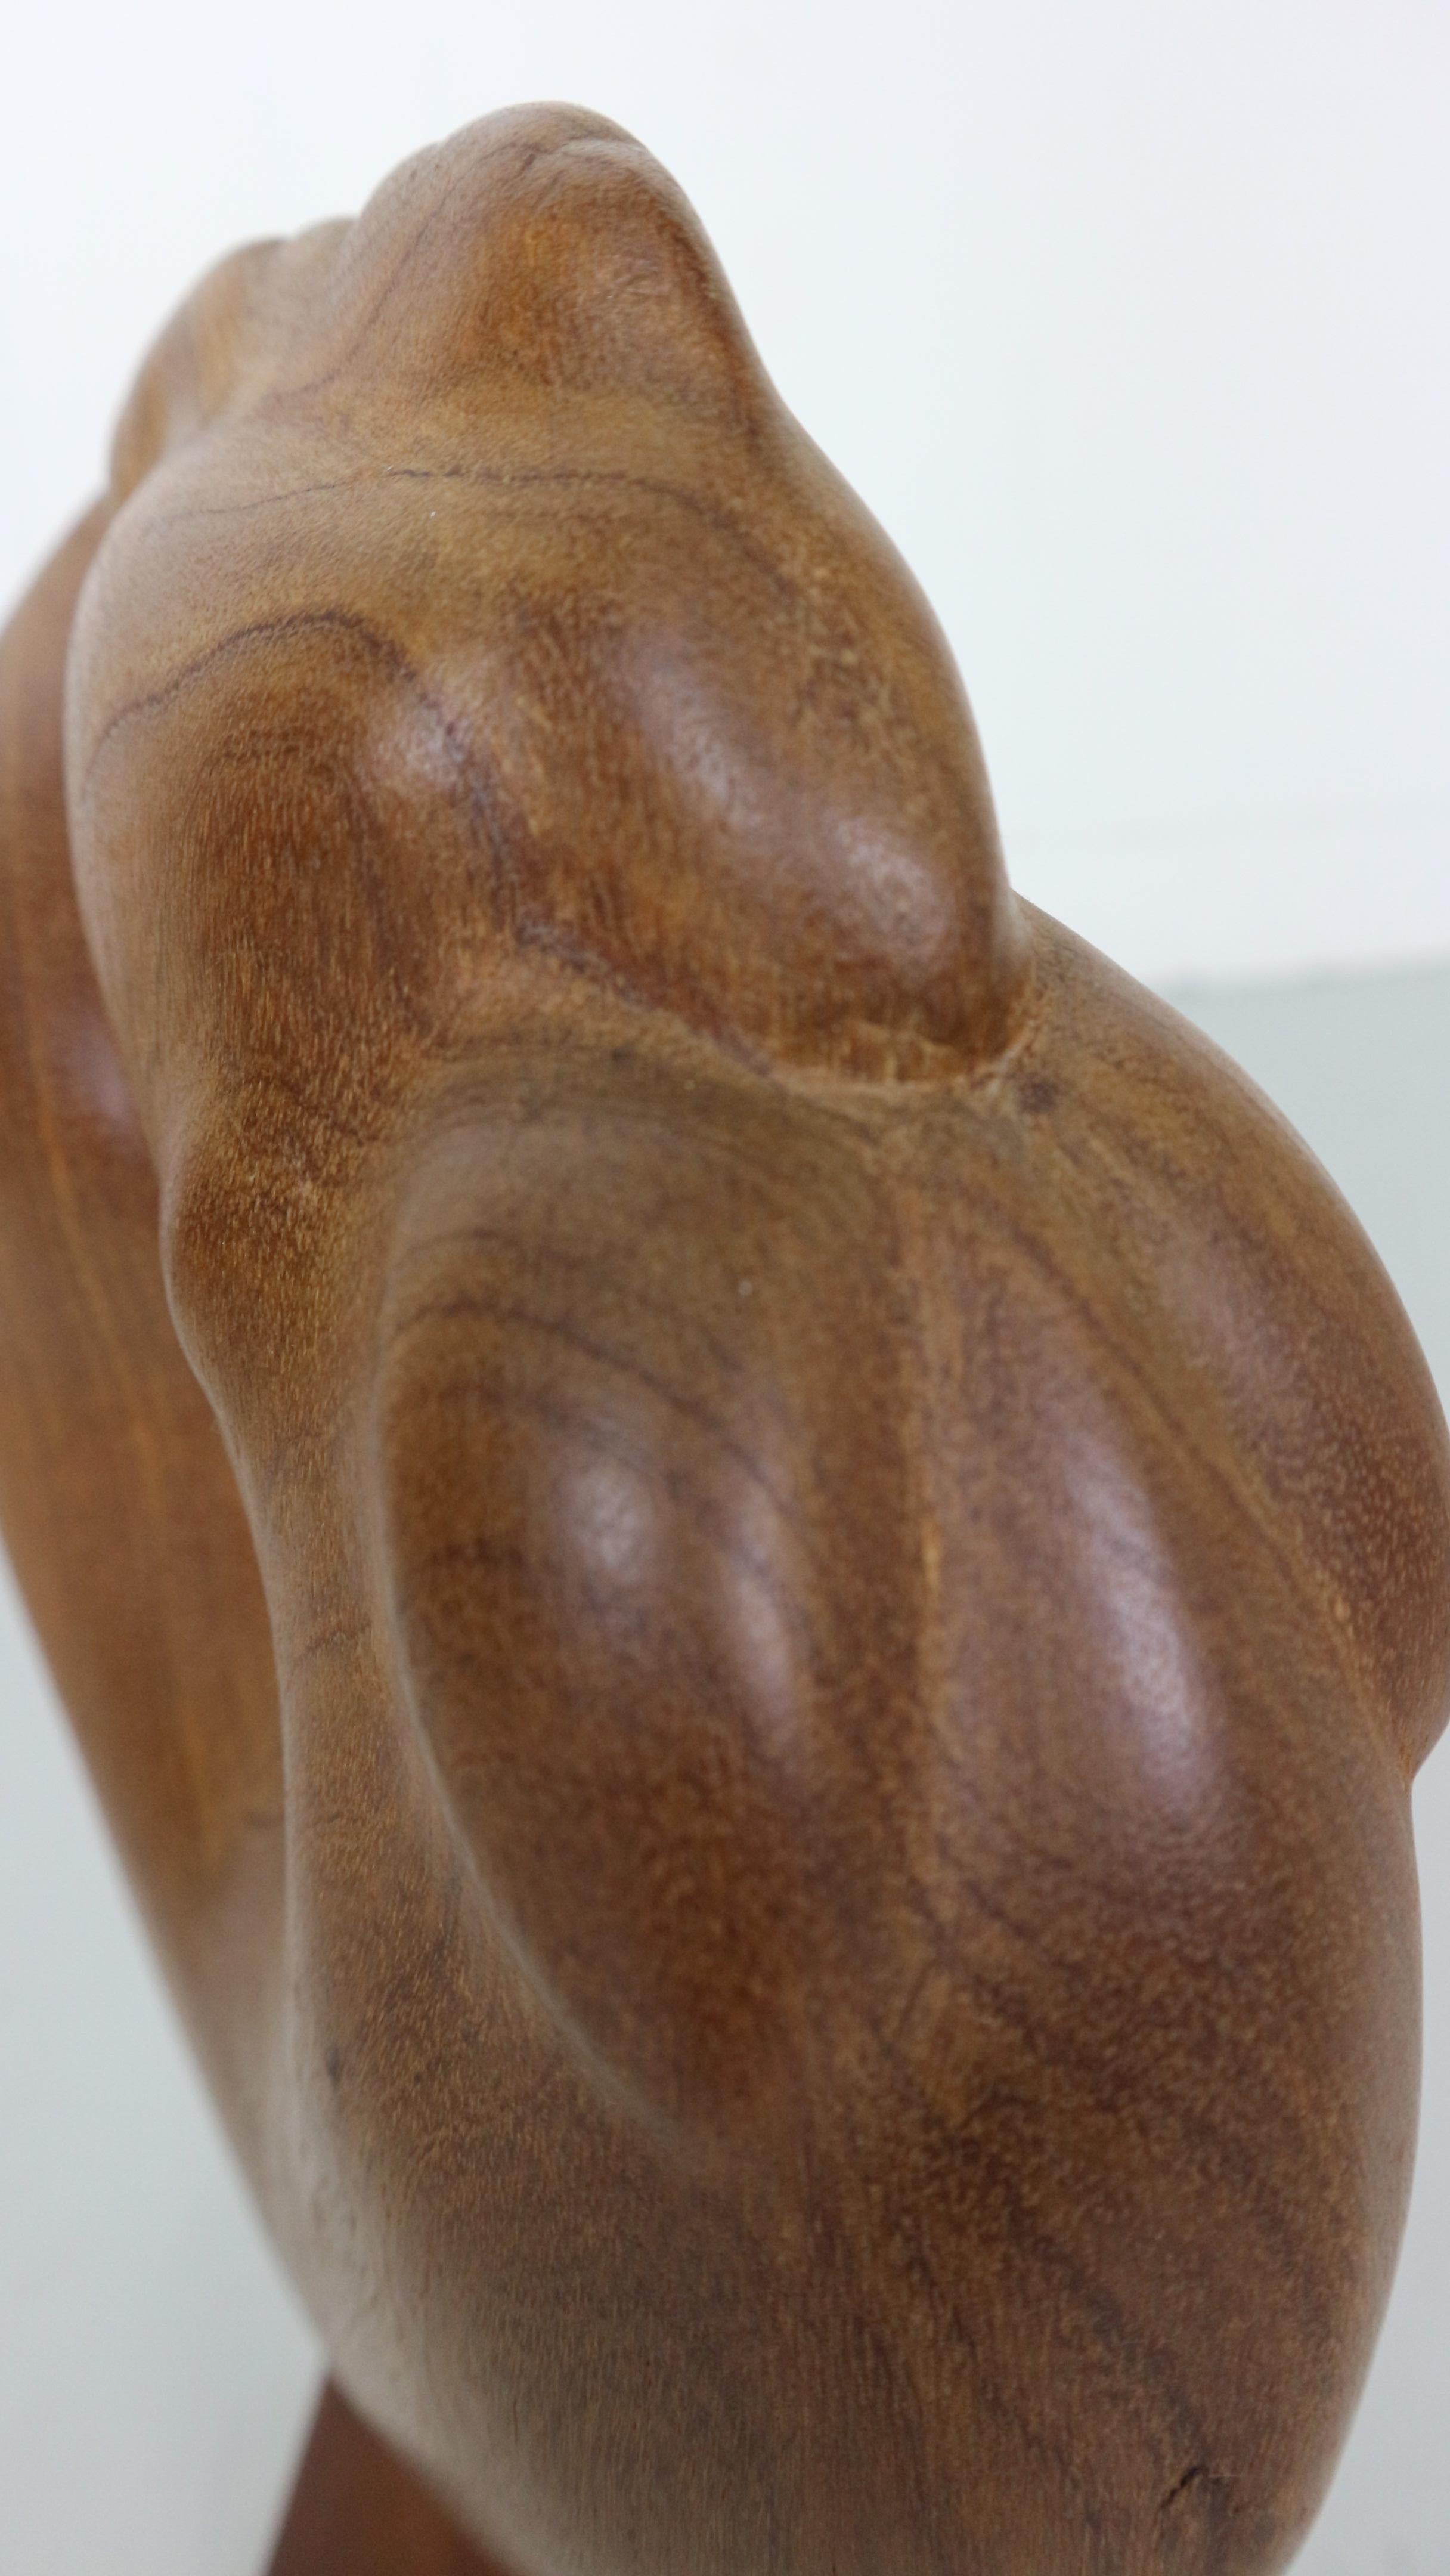 organically shaped wood sculpture 1950s Netherlands, Rooster 3